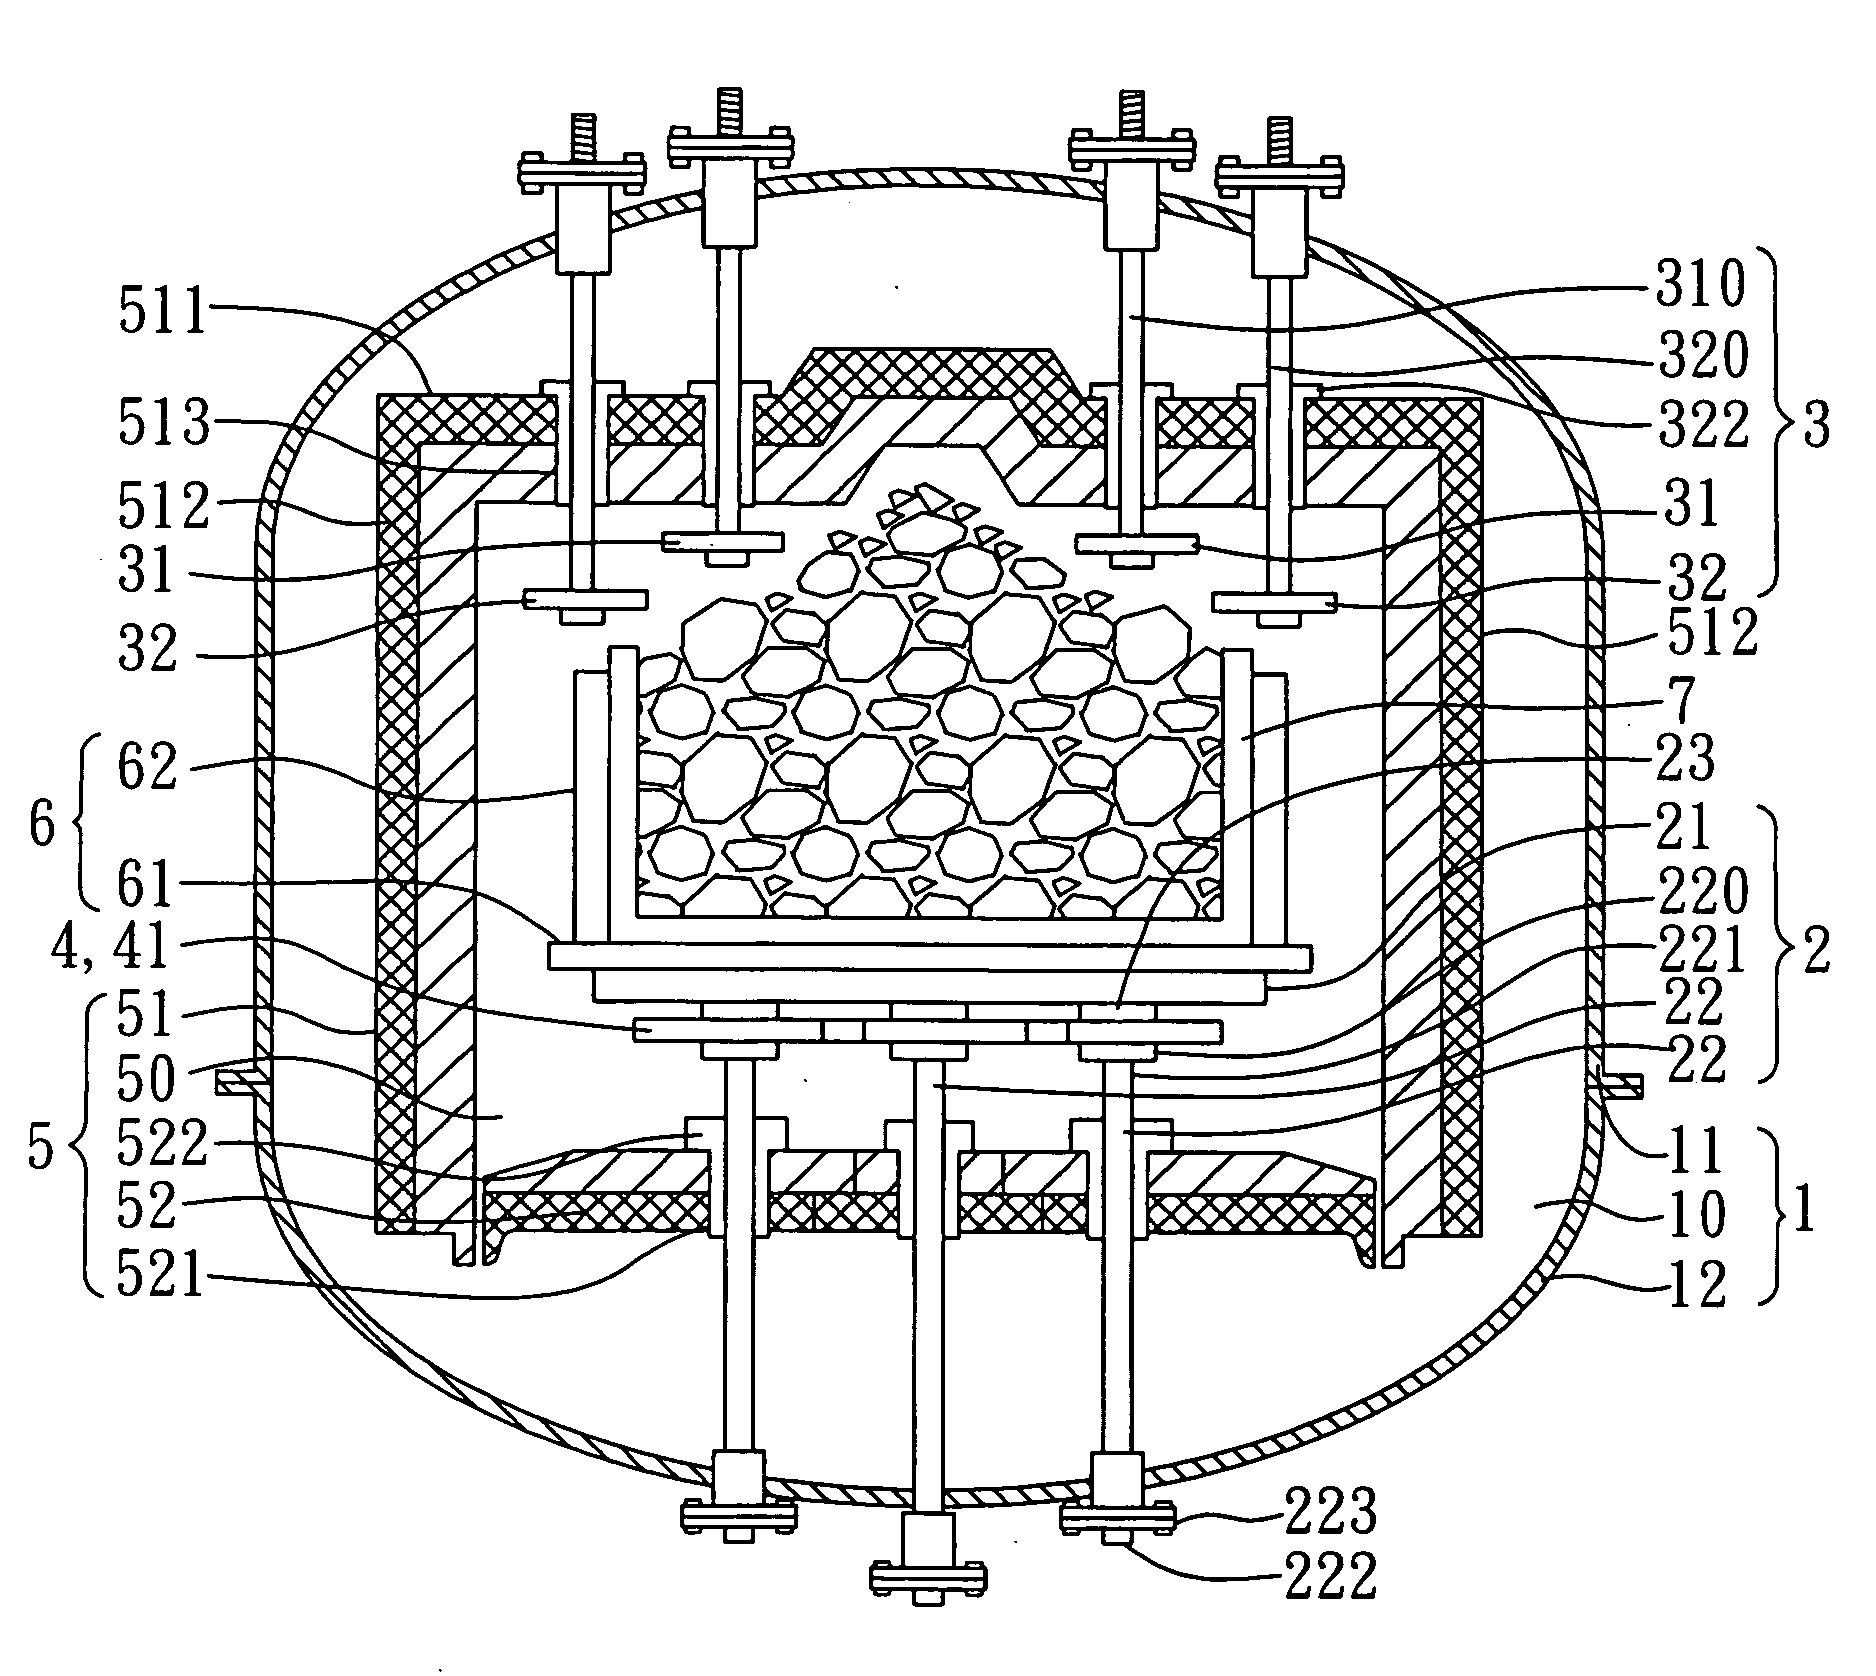 Crystal-growing furnace with heating improvement structure